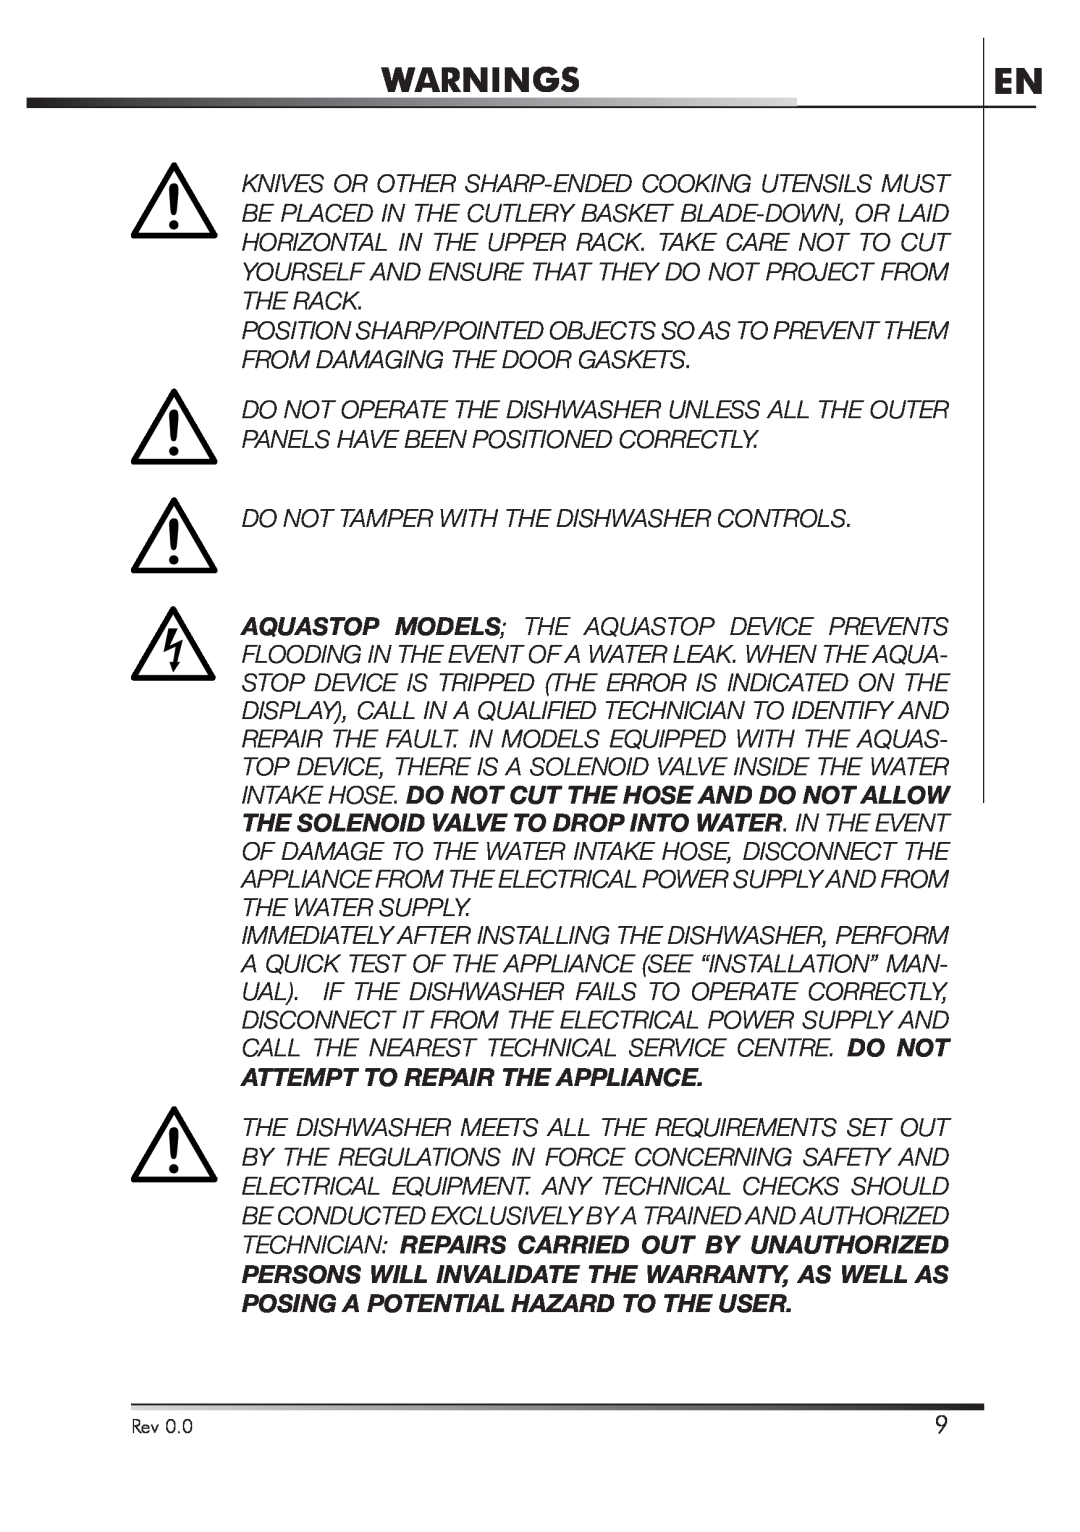 Smeg STA4645U manual Warnings, Attempt To Repair The Appliance 